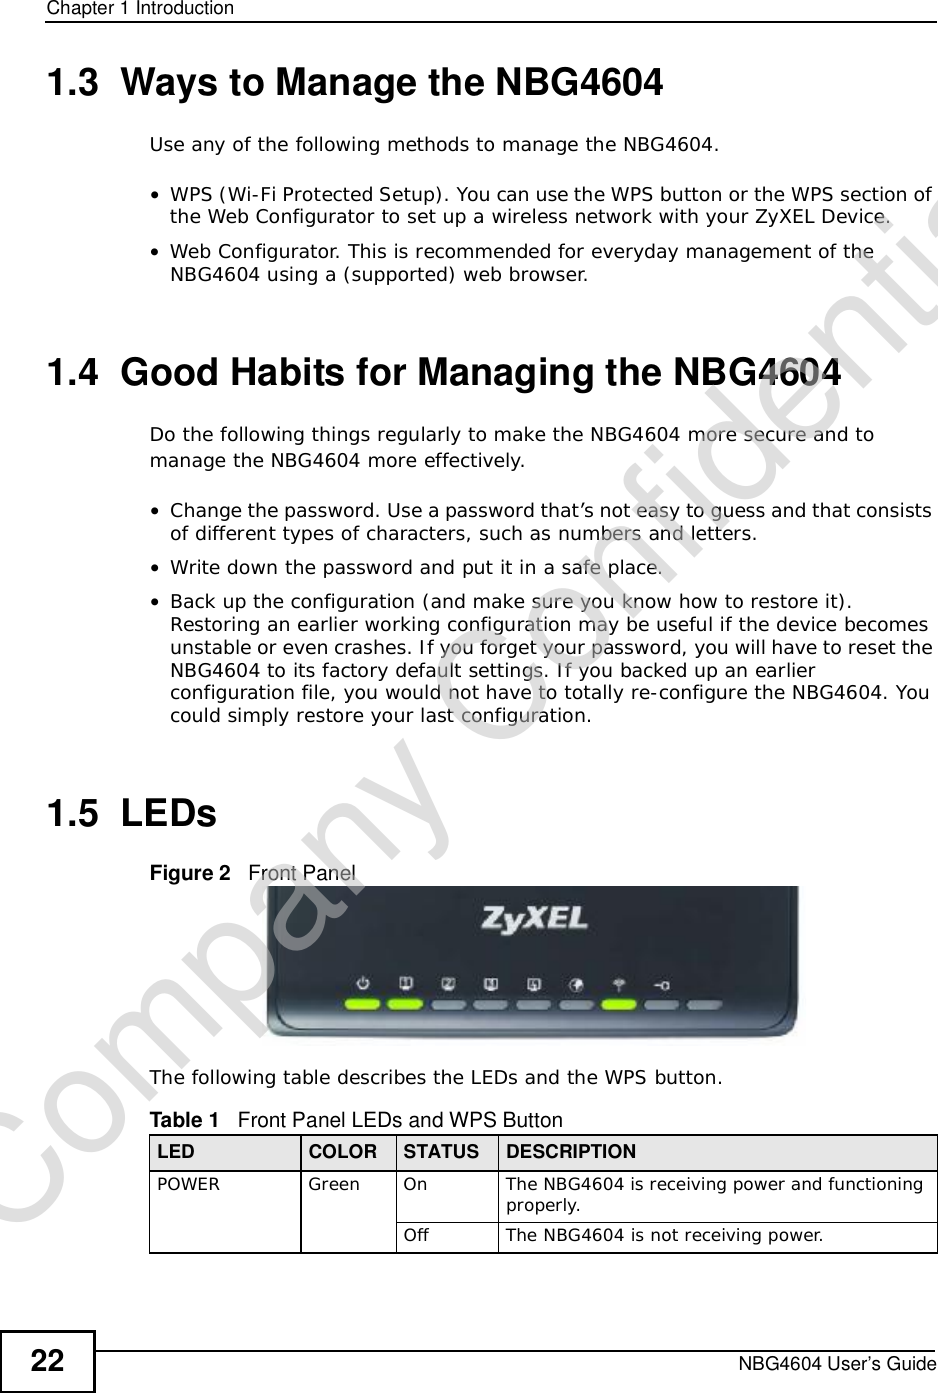 Chapter 1IntroductionNBG4604 User’s Guide221.3  Ways to Manage the NBG4604Use any of the following methods to manage the NBG4604.•WPS (Wi-Fi Protected Setup). You can use the WPS button or the WPS section of the Web Configurator to set up a wireless network with your ZyXEL Device.•Web Configurator. This is recommended for everyday management of the NBG4604 using a (supported) web browser.1.4  Good Habits for Managing the NBG4604Do the following things regularly to make the NBG4604 more secure and to manage the NBG4604 more effectively.•Change the password. Use a password that’s not easy to guess and that consists of different types of characters, such as numbers and letters.•Write down the password and put it in a safe place.•Back up the configuration (and make sure you know how to restore it). Restoring an earlier working configuration may be useful if the device becomes unstable or even crashes. If you forget your password, you will have to reset the NBG4604 to its factory default settings. If you backed up an earlier configuration file, you would not have to totally re-configure the NBG4604. You could simply restore your last configuration.1.5  LEDsFigure 2   Front PanelThe following table describes the LEDs and the WPS button.Table 1   Front Panel LEDs and WPS ButtonLED COLOR STATUS DESCRIPTIONPOWERGreenOnThe NBG4604 is receiving power and functioning properly. OffThe NBG4604 is not receiving power.Company Confidential